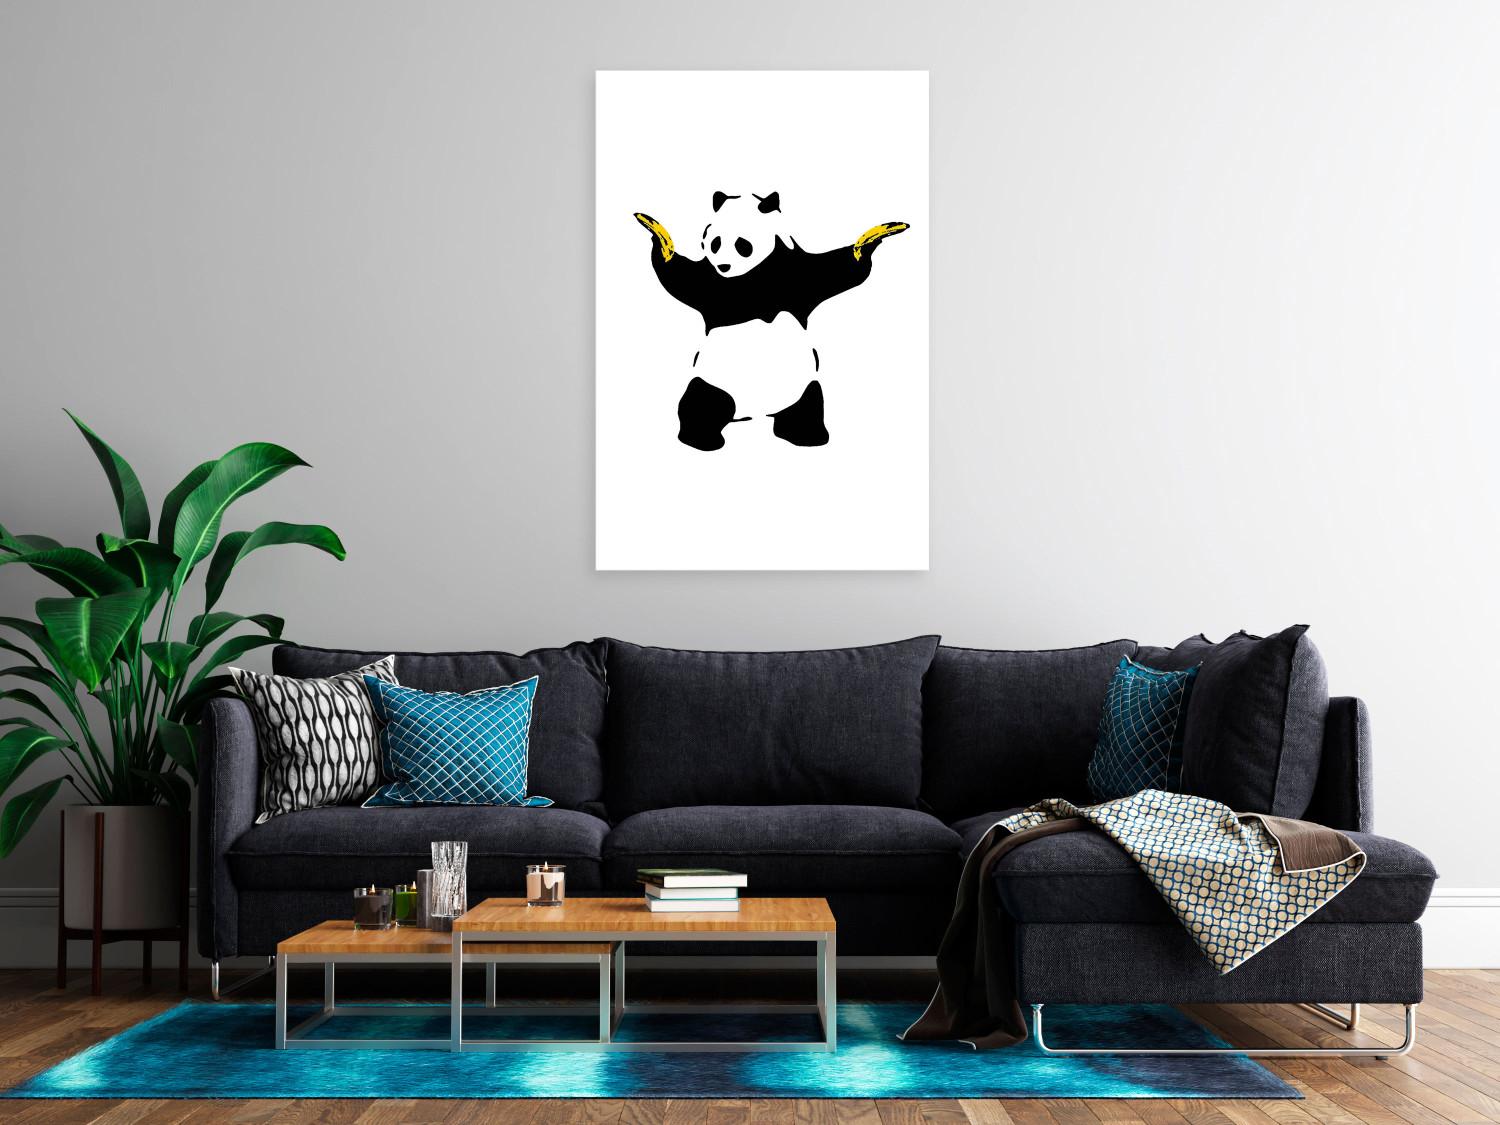 Canvas Panda with Guns (1-piece) Vertical - exotic animal with bananas